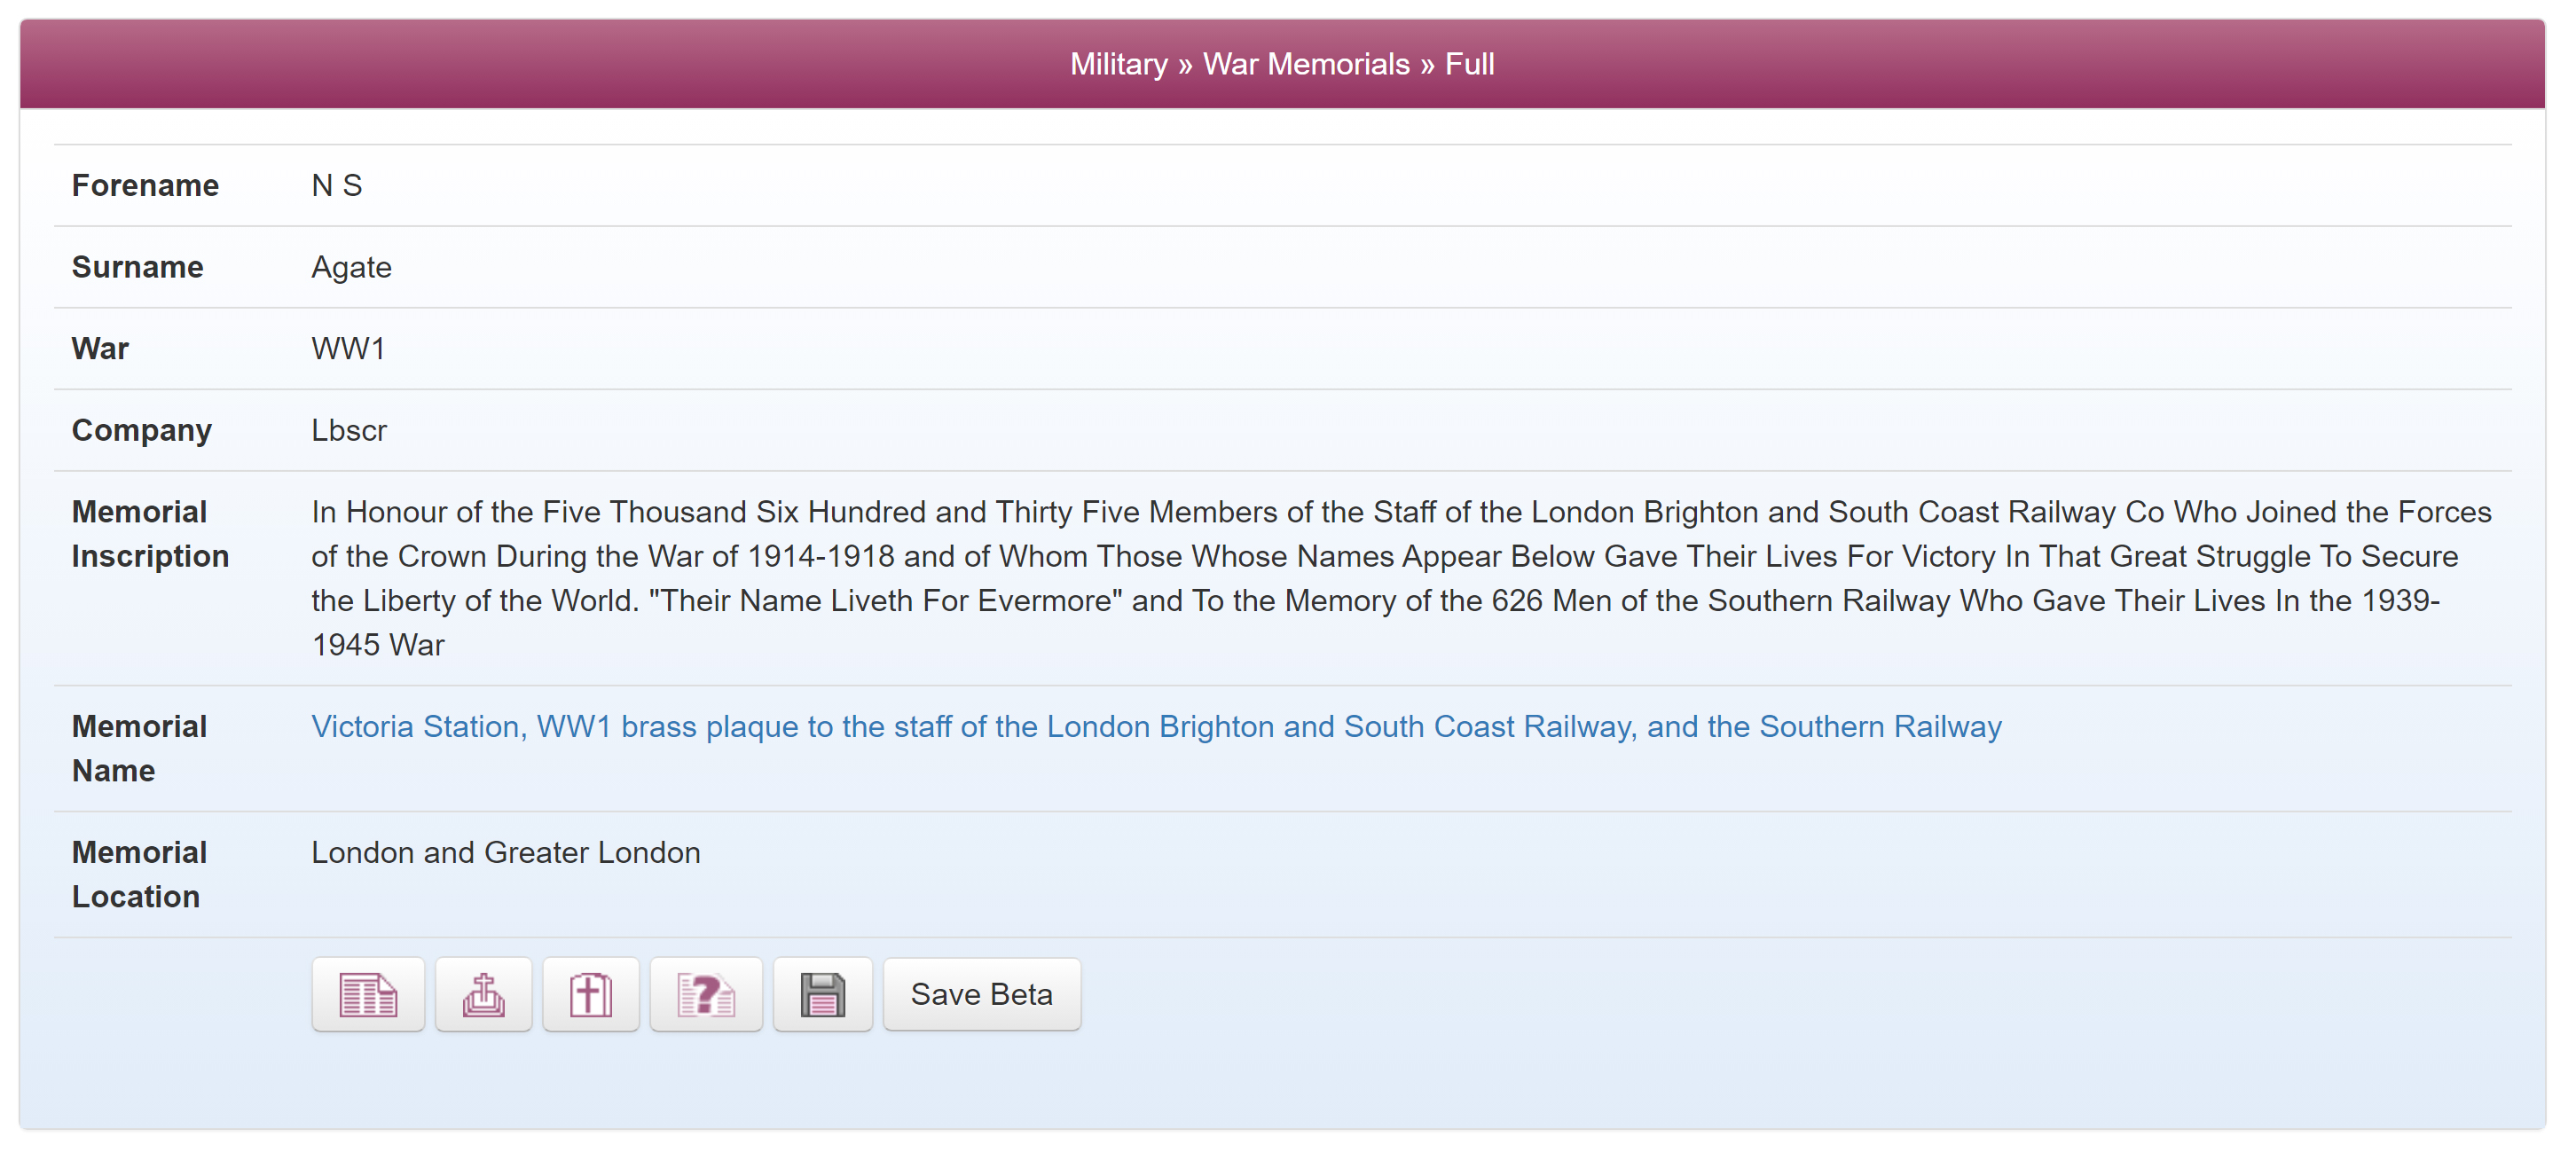 Norman Agate's War Memorial records on TheGenealogist.co.uk